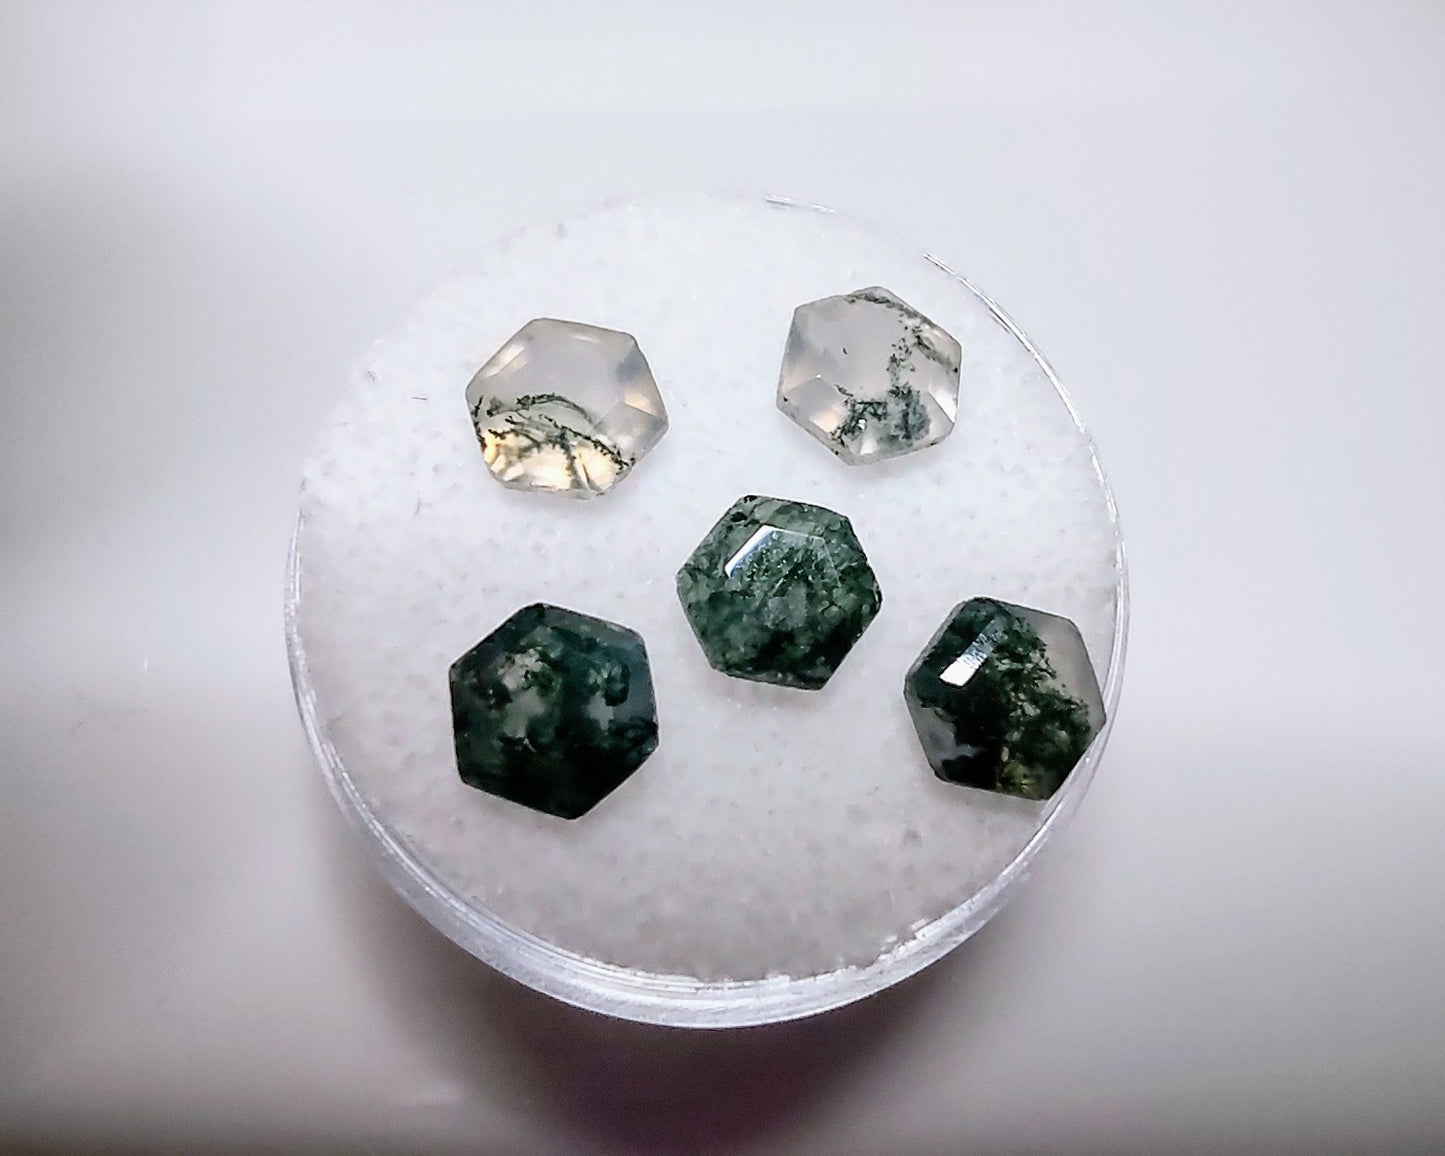 5 hexagon cut moss agate gems with varying intensities of green.